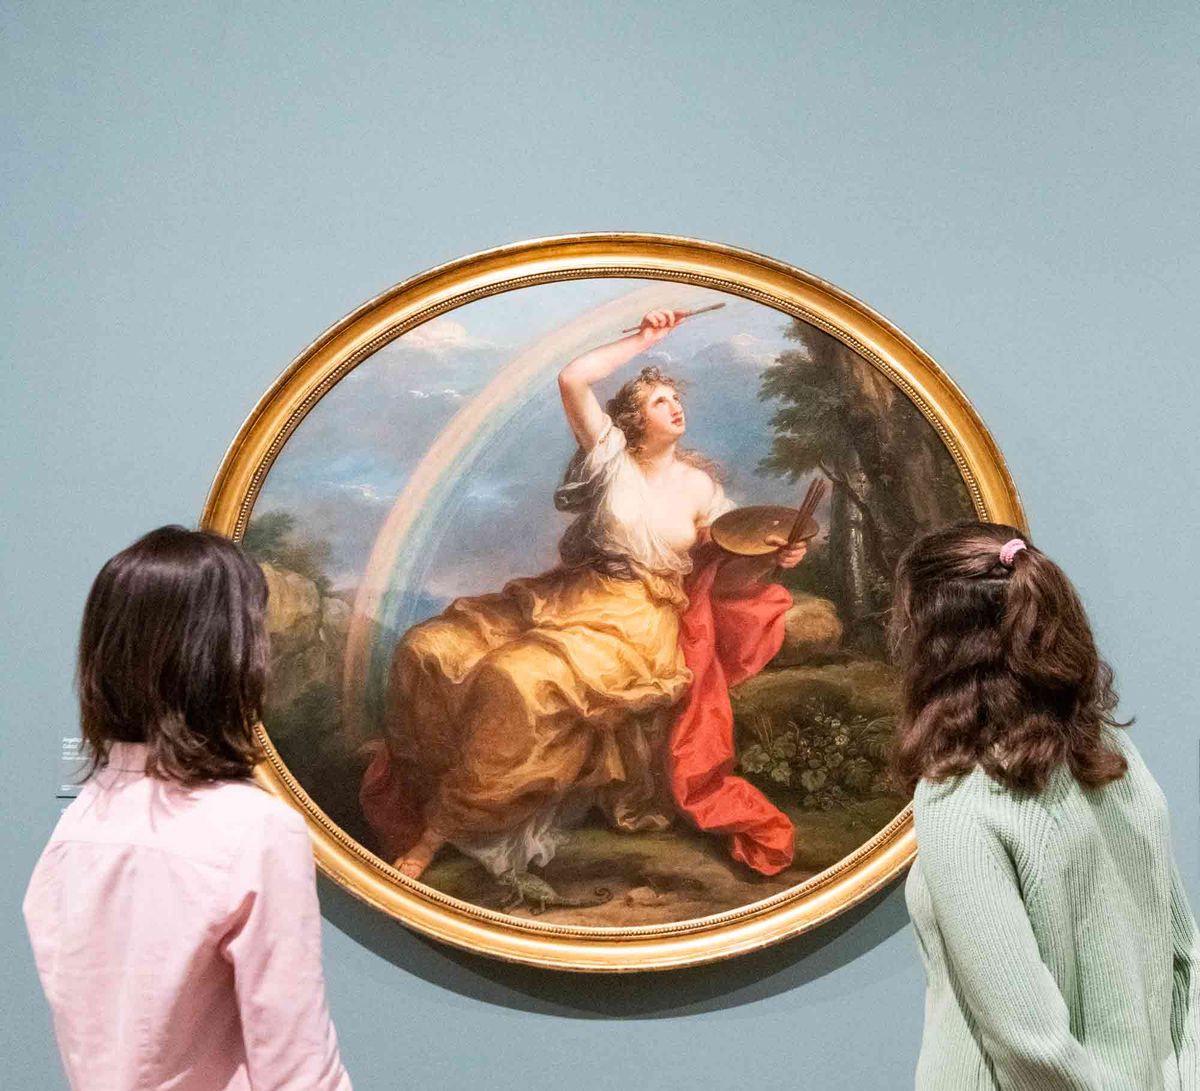 Installation view of Angelica Kauffman, R.A’s Colouring, 1778-80 

© Tate photography (Lucy Green)